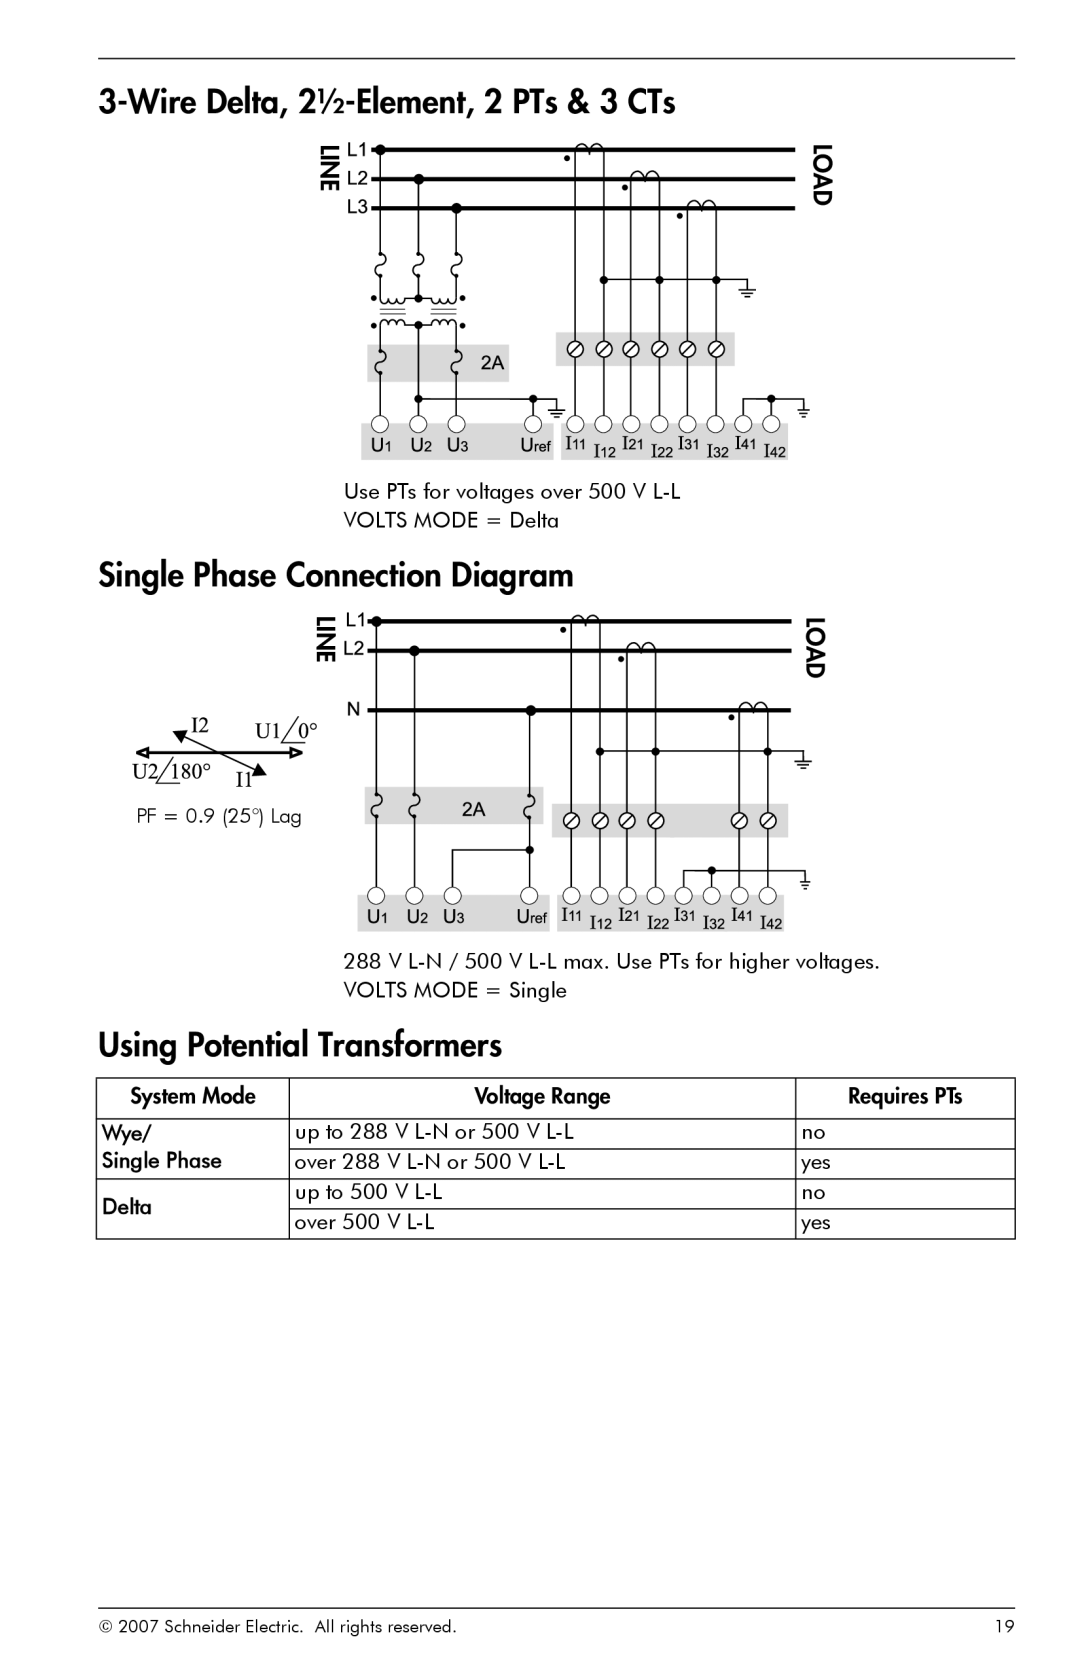 Schneider Electric ION8800 manual Wire Delta, 2½-Element, 2 PTs & 3 CTs, Single Phase Connection Diagram, Line, Load 